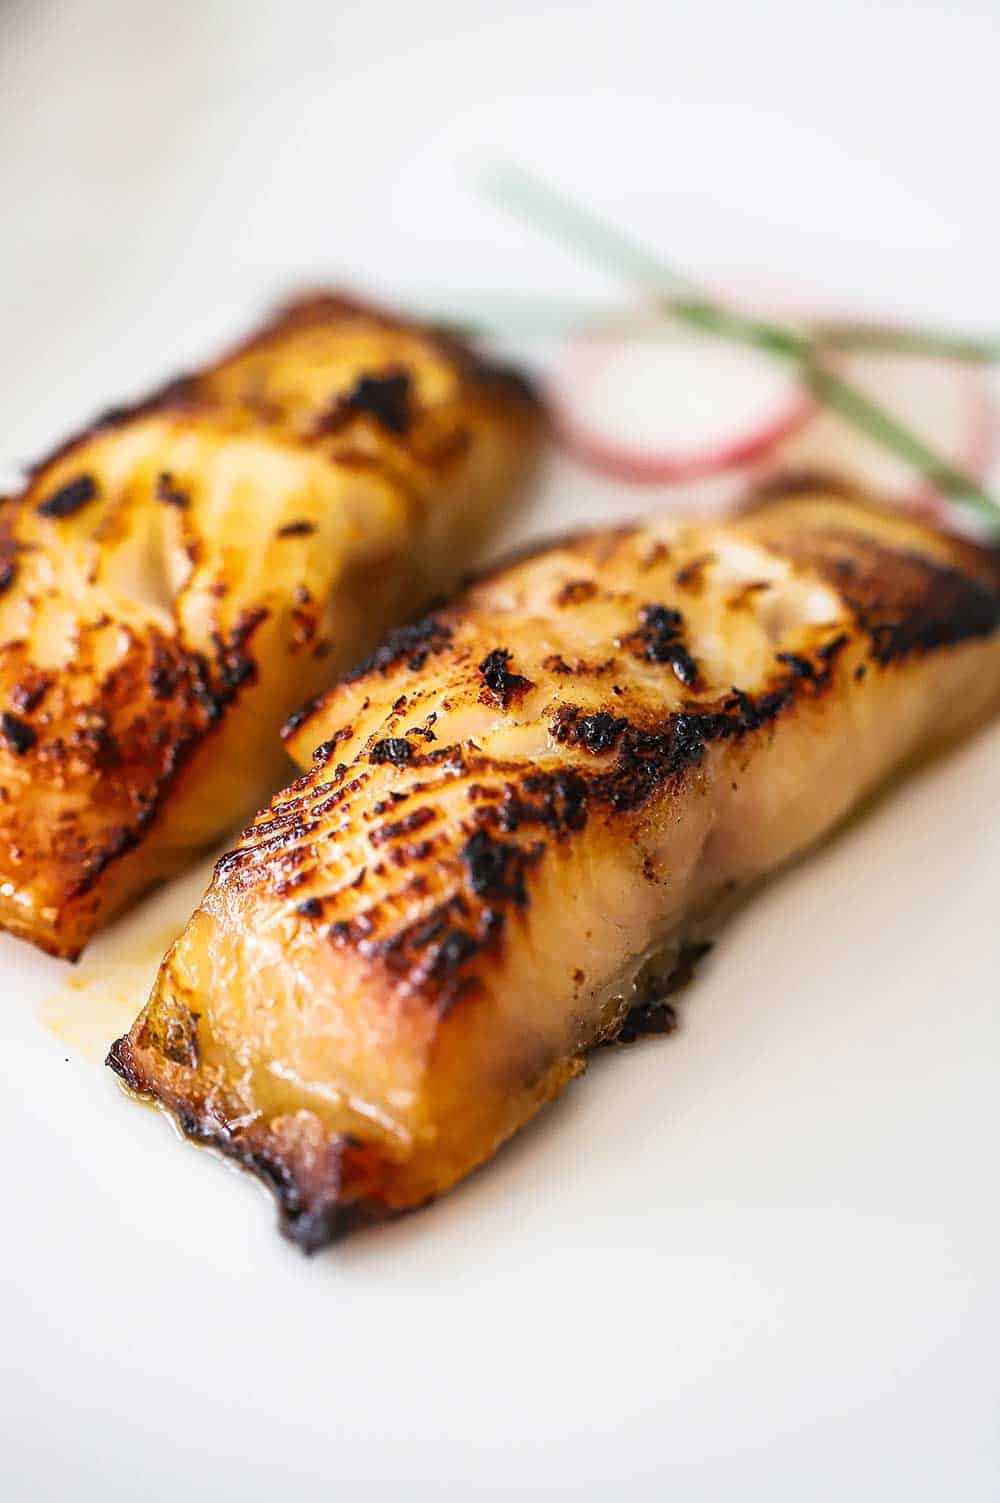 A close-up view of two miso cod fillets that have been lightly charred on a white plate.